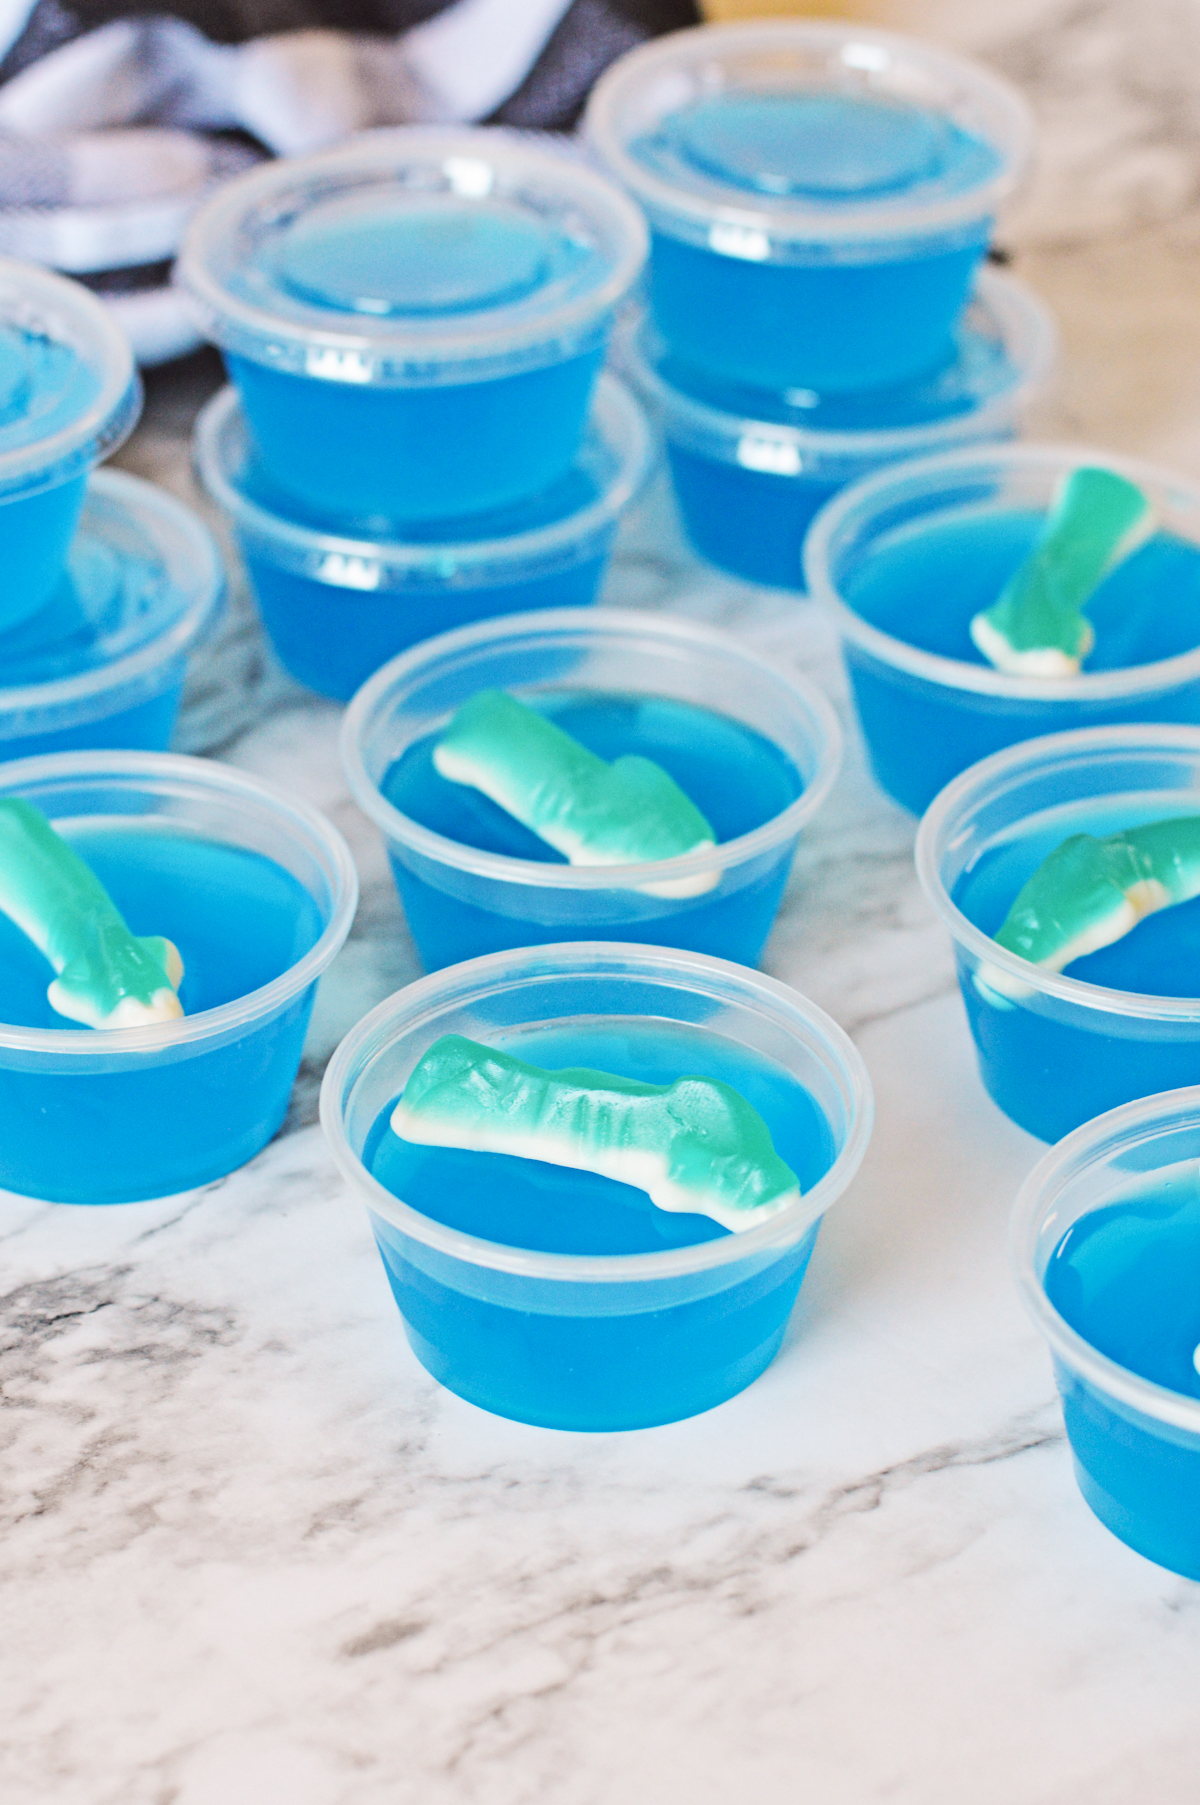 Shark bite jello shots topped with shark gummies, some with lids on the shot cups.